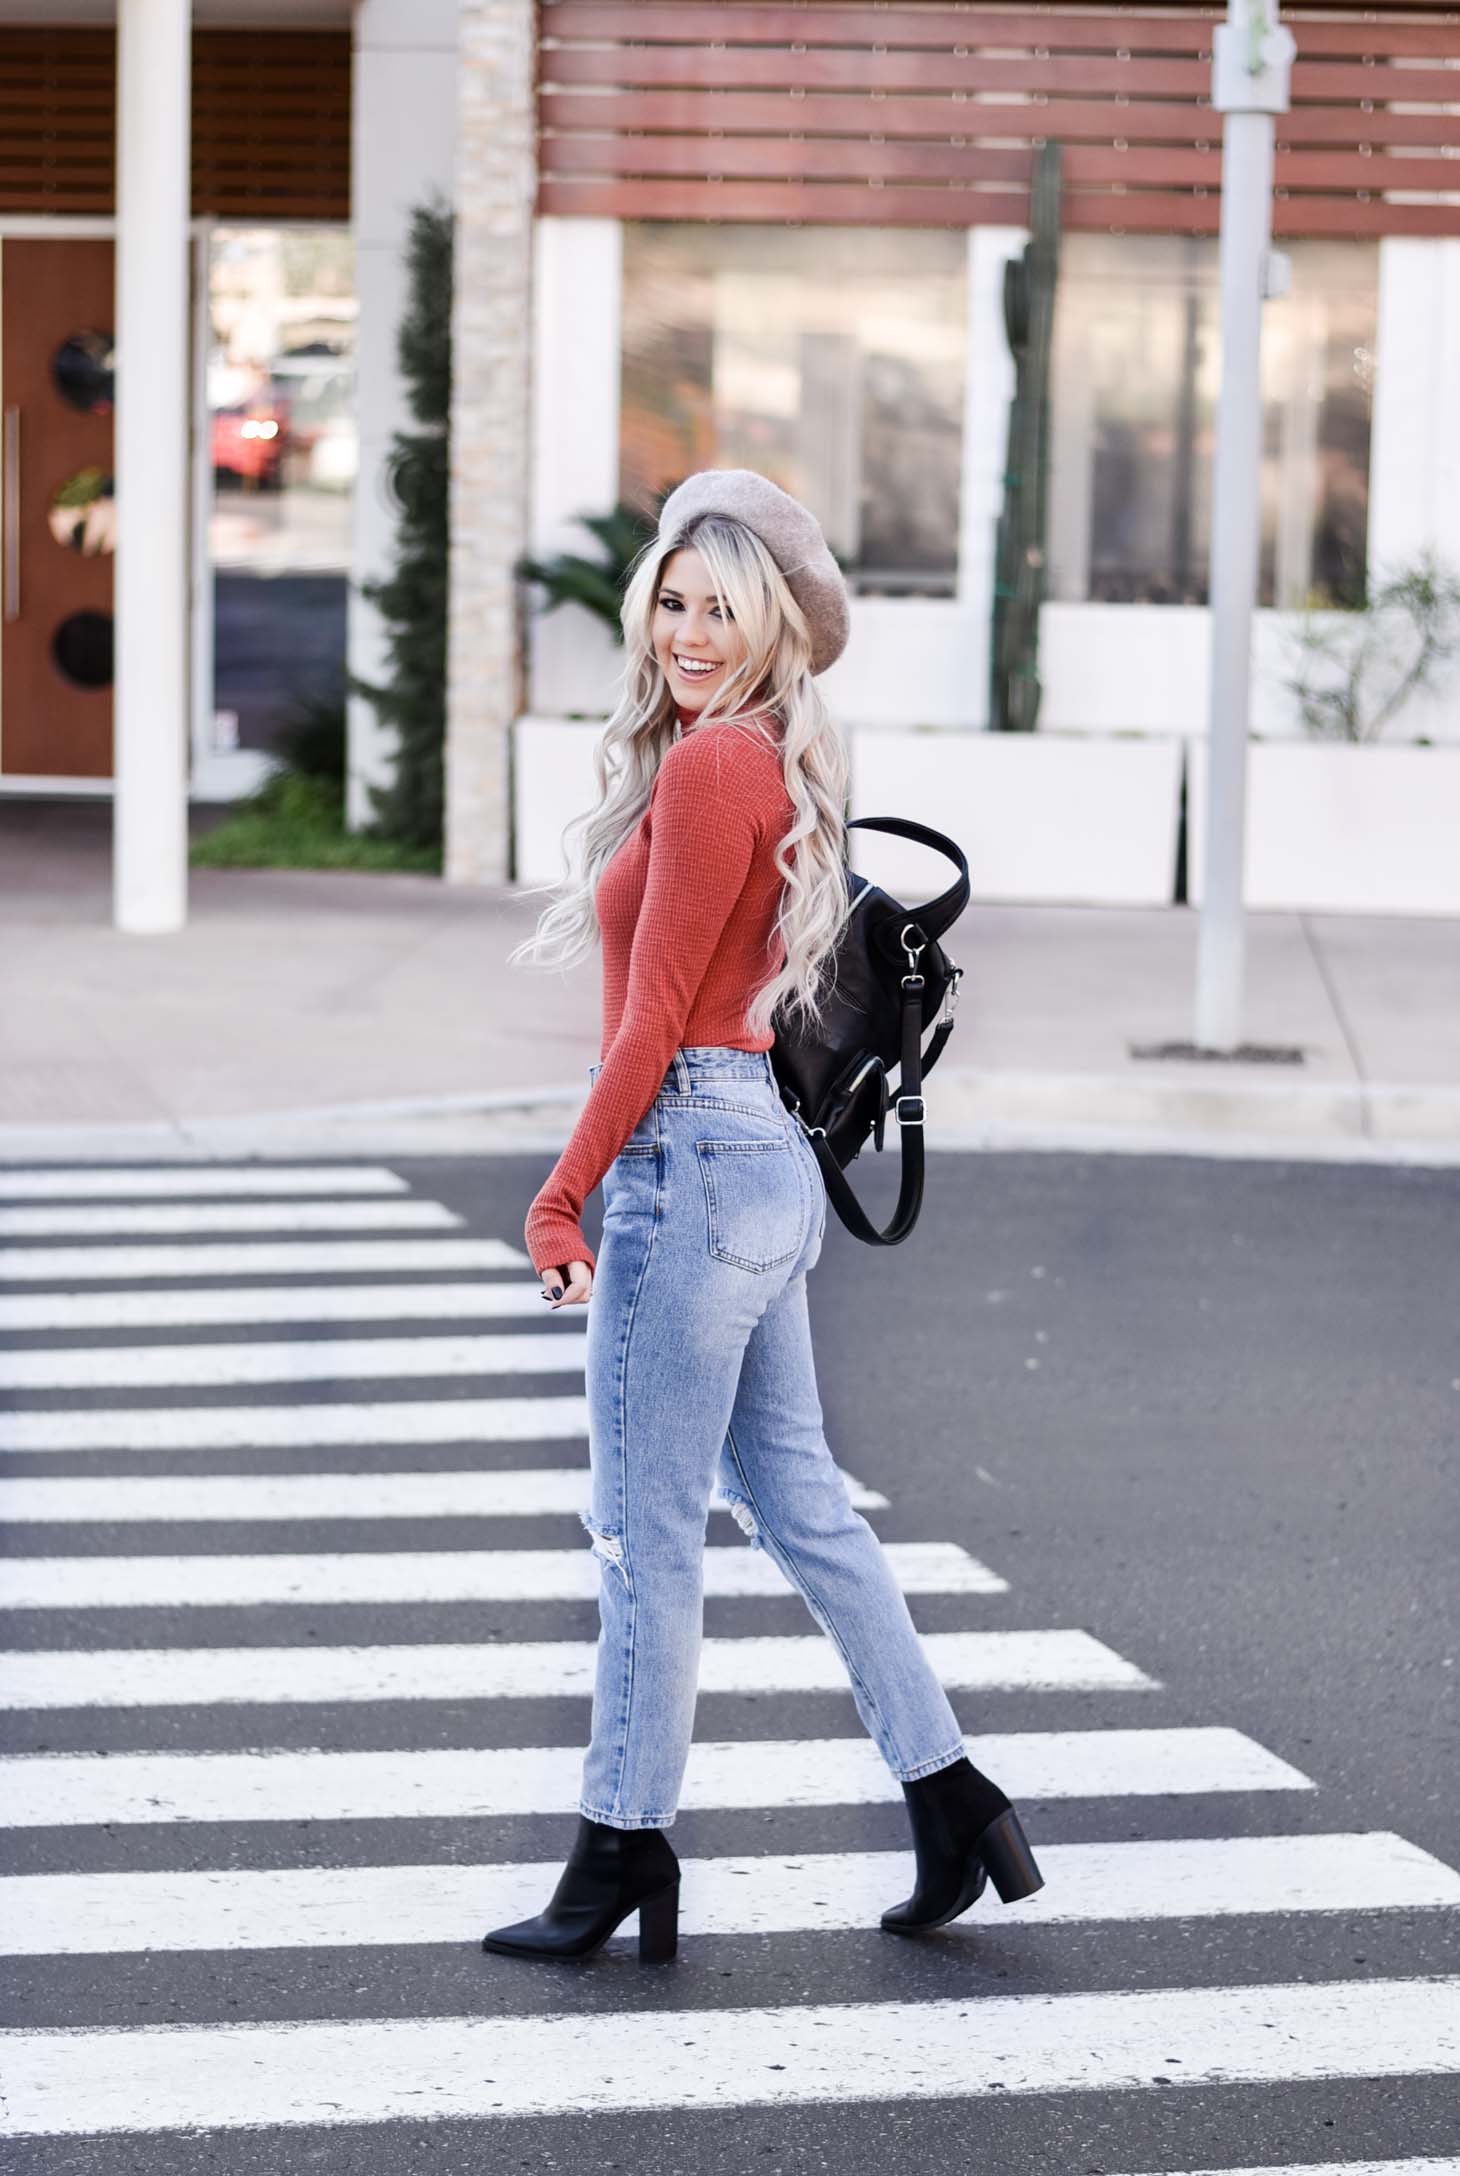 Erin Elizabeth of Wink and a Twirl shares the perfect casual Fall look from LuLus